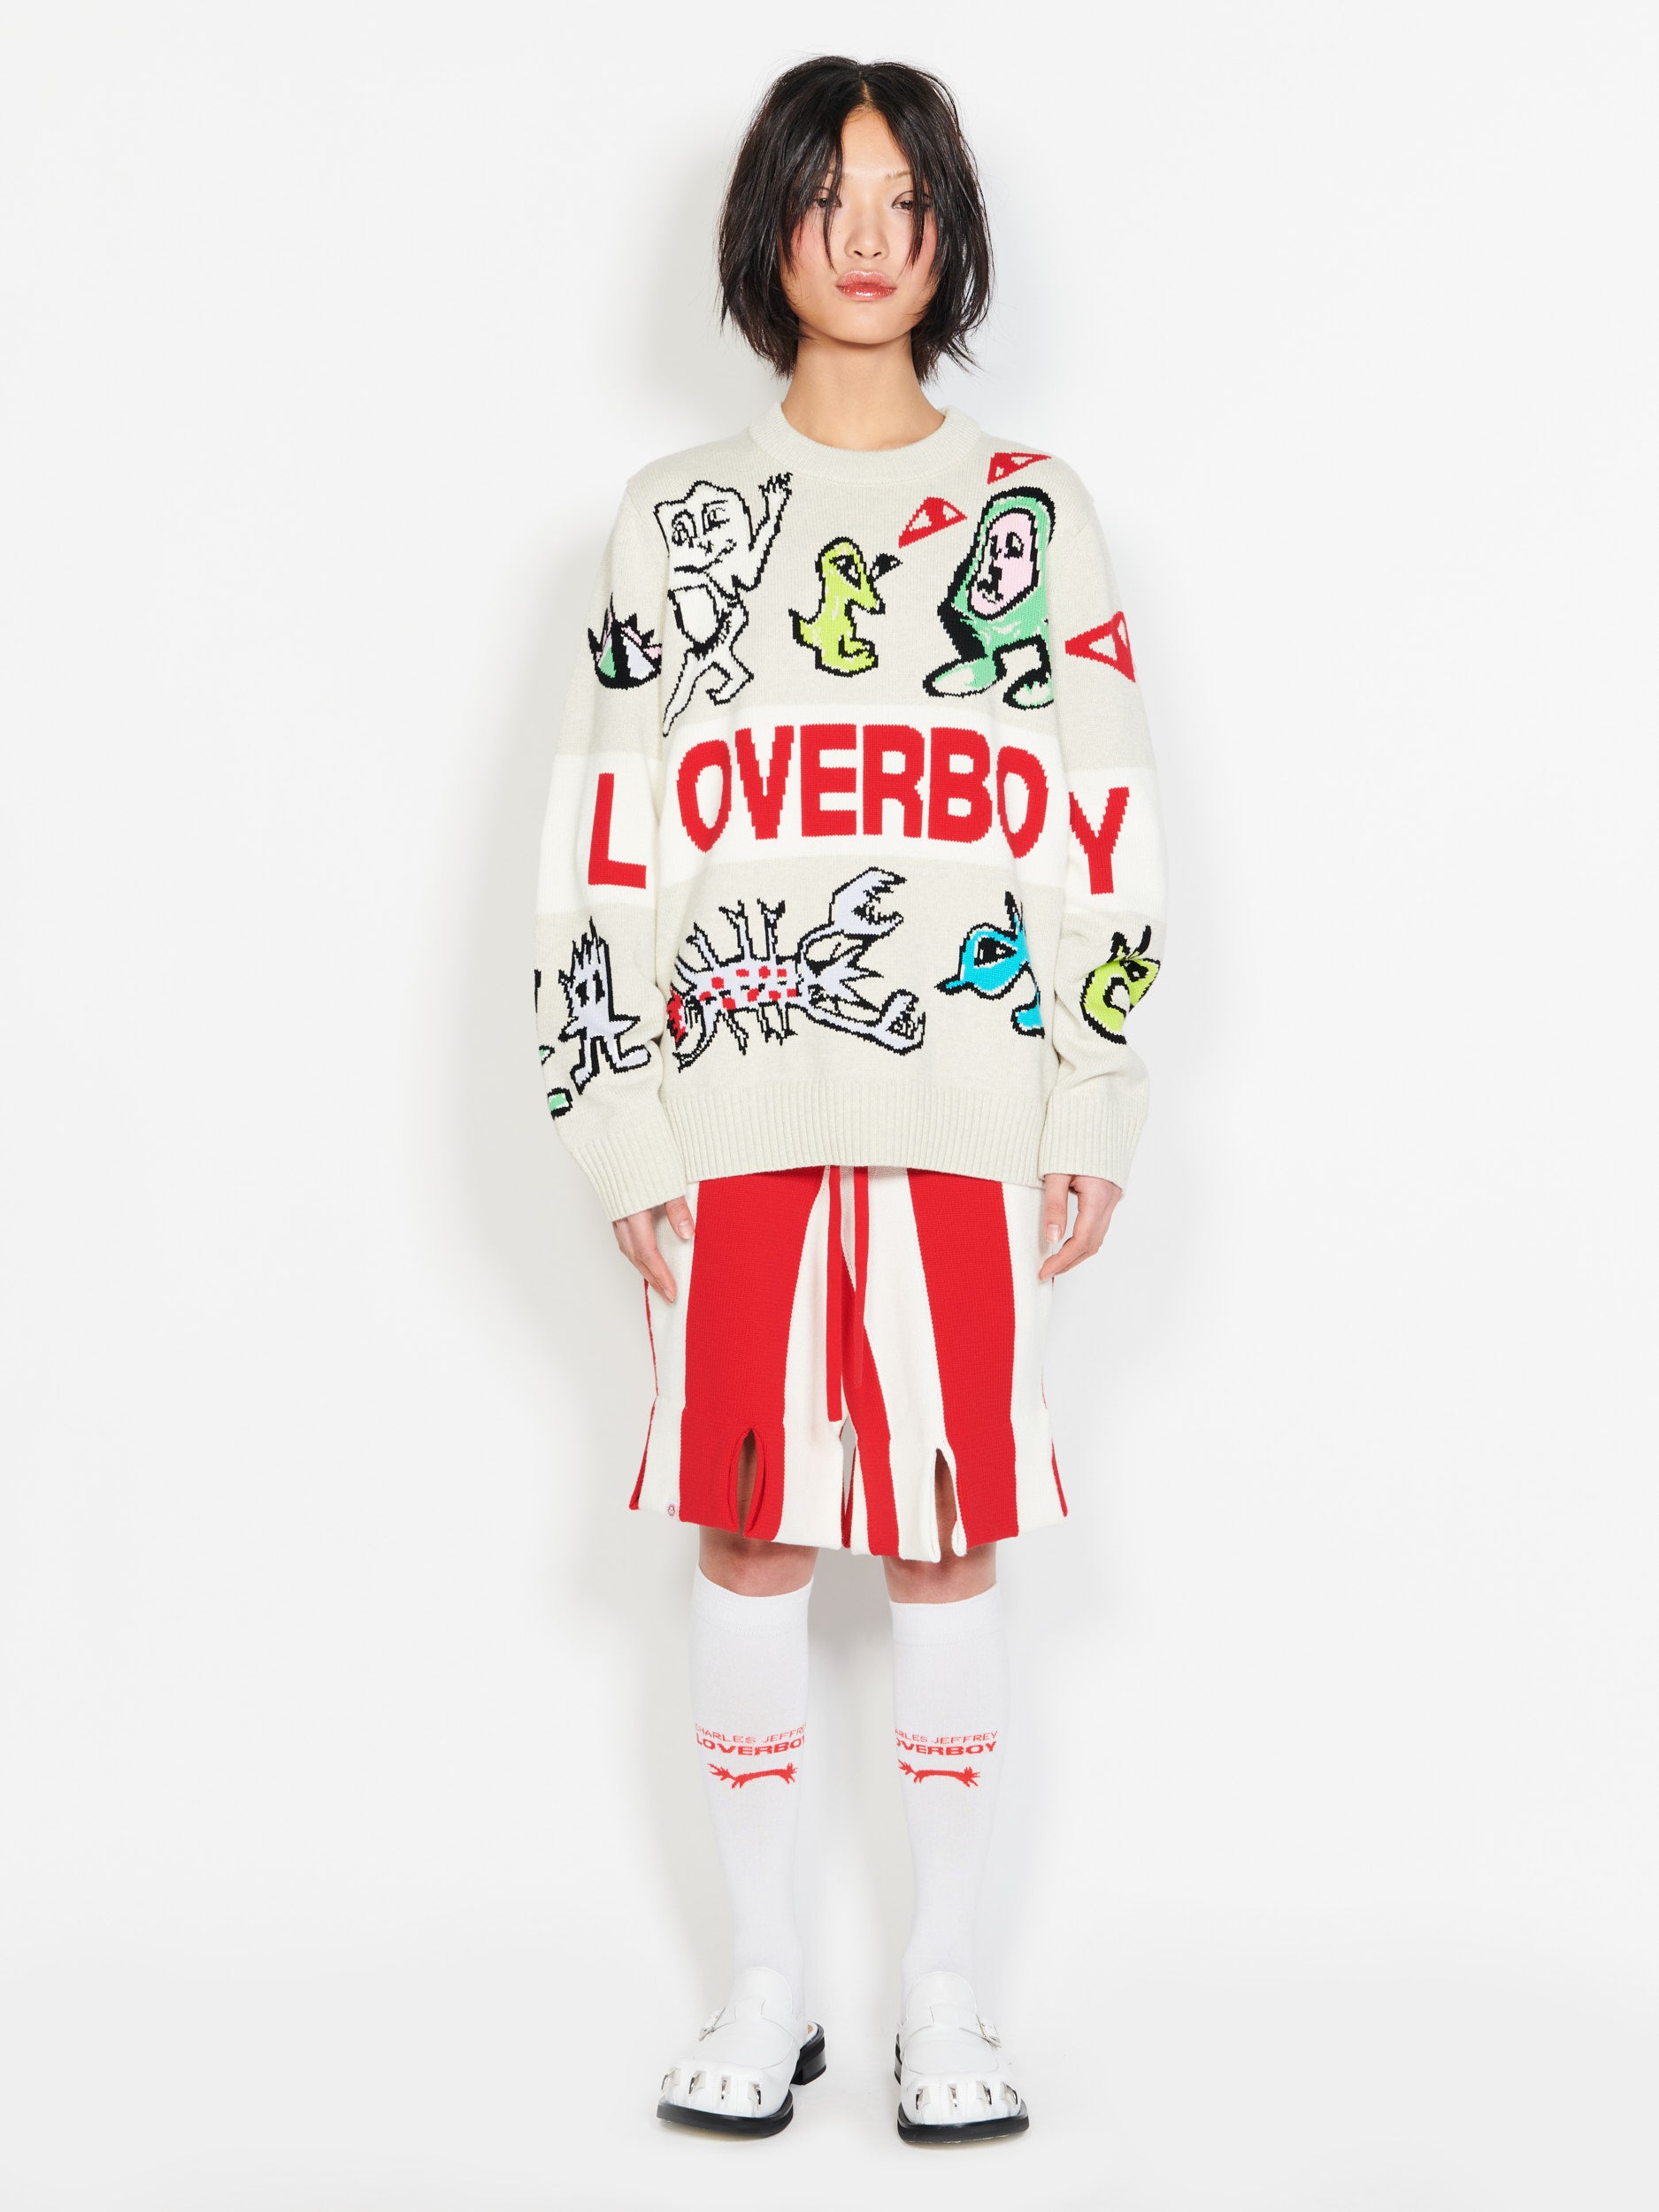 New Arrivals clothing | Charles Jeffrey Loverboy